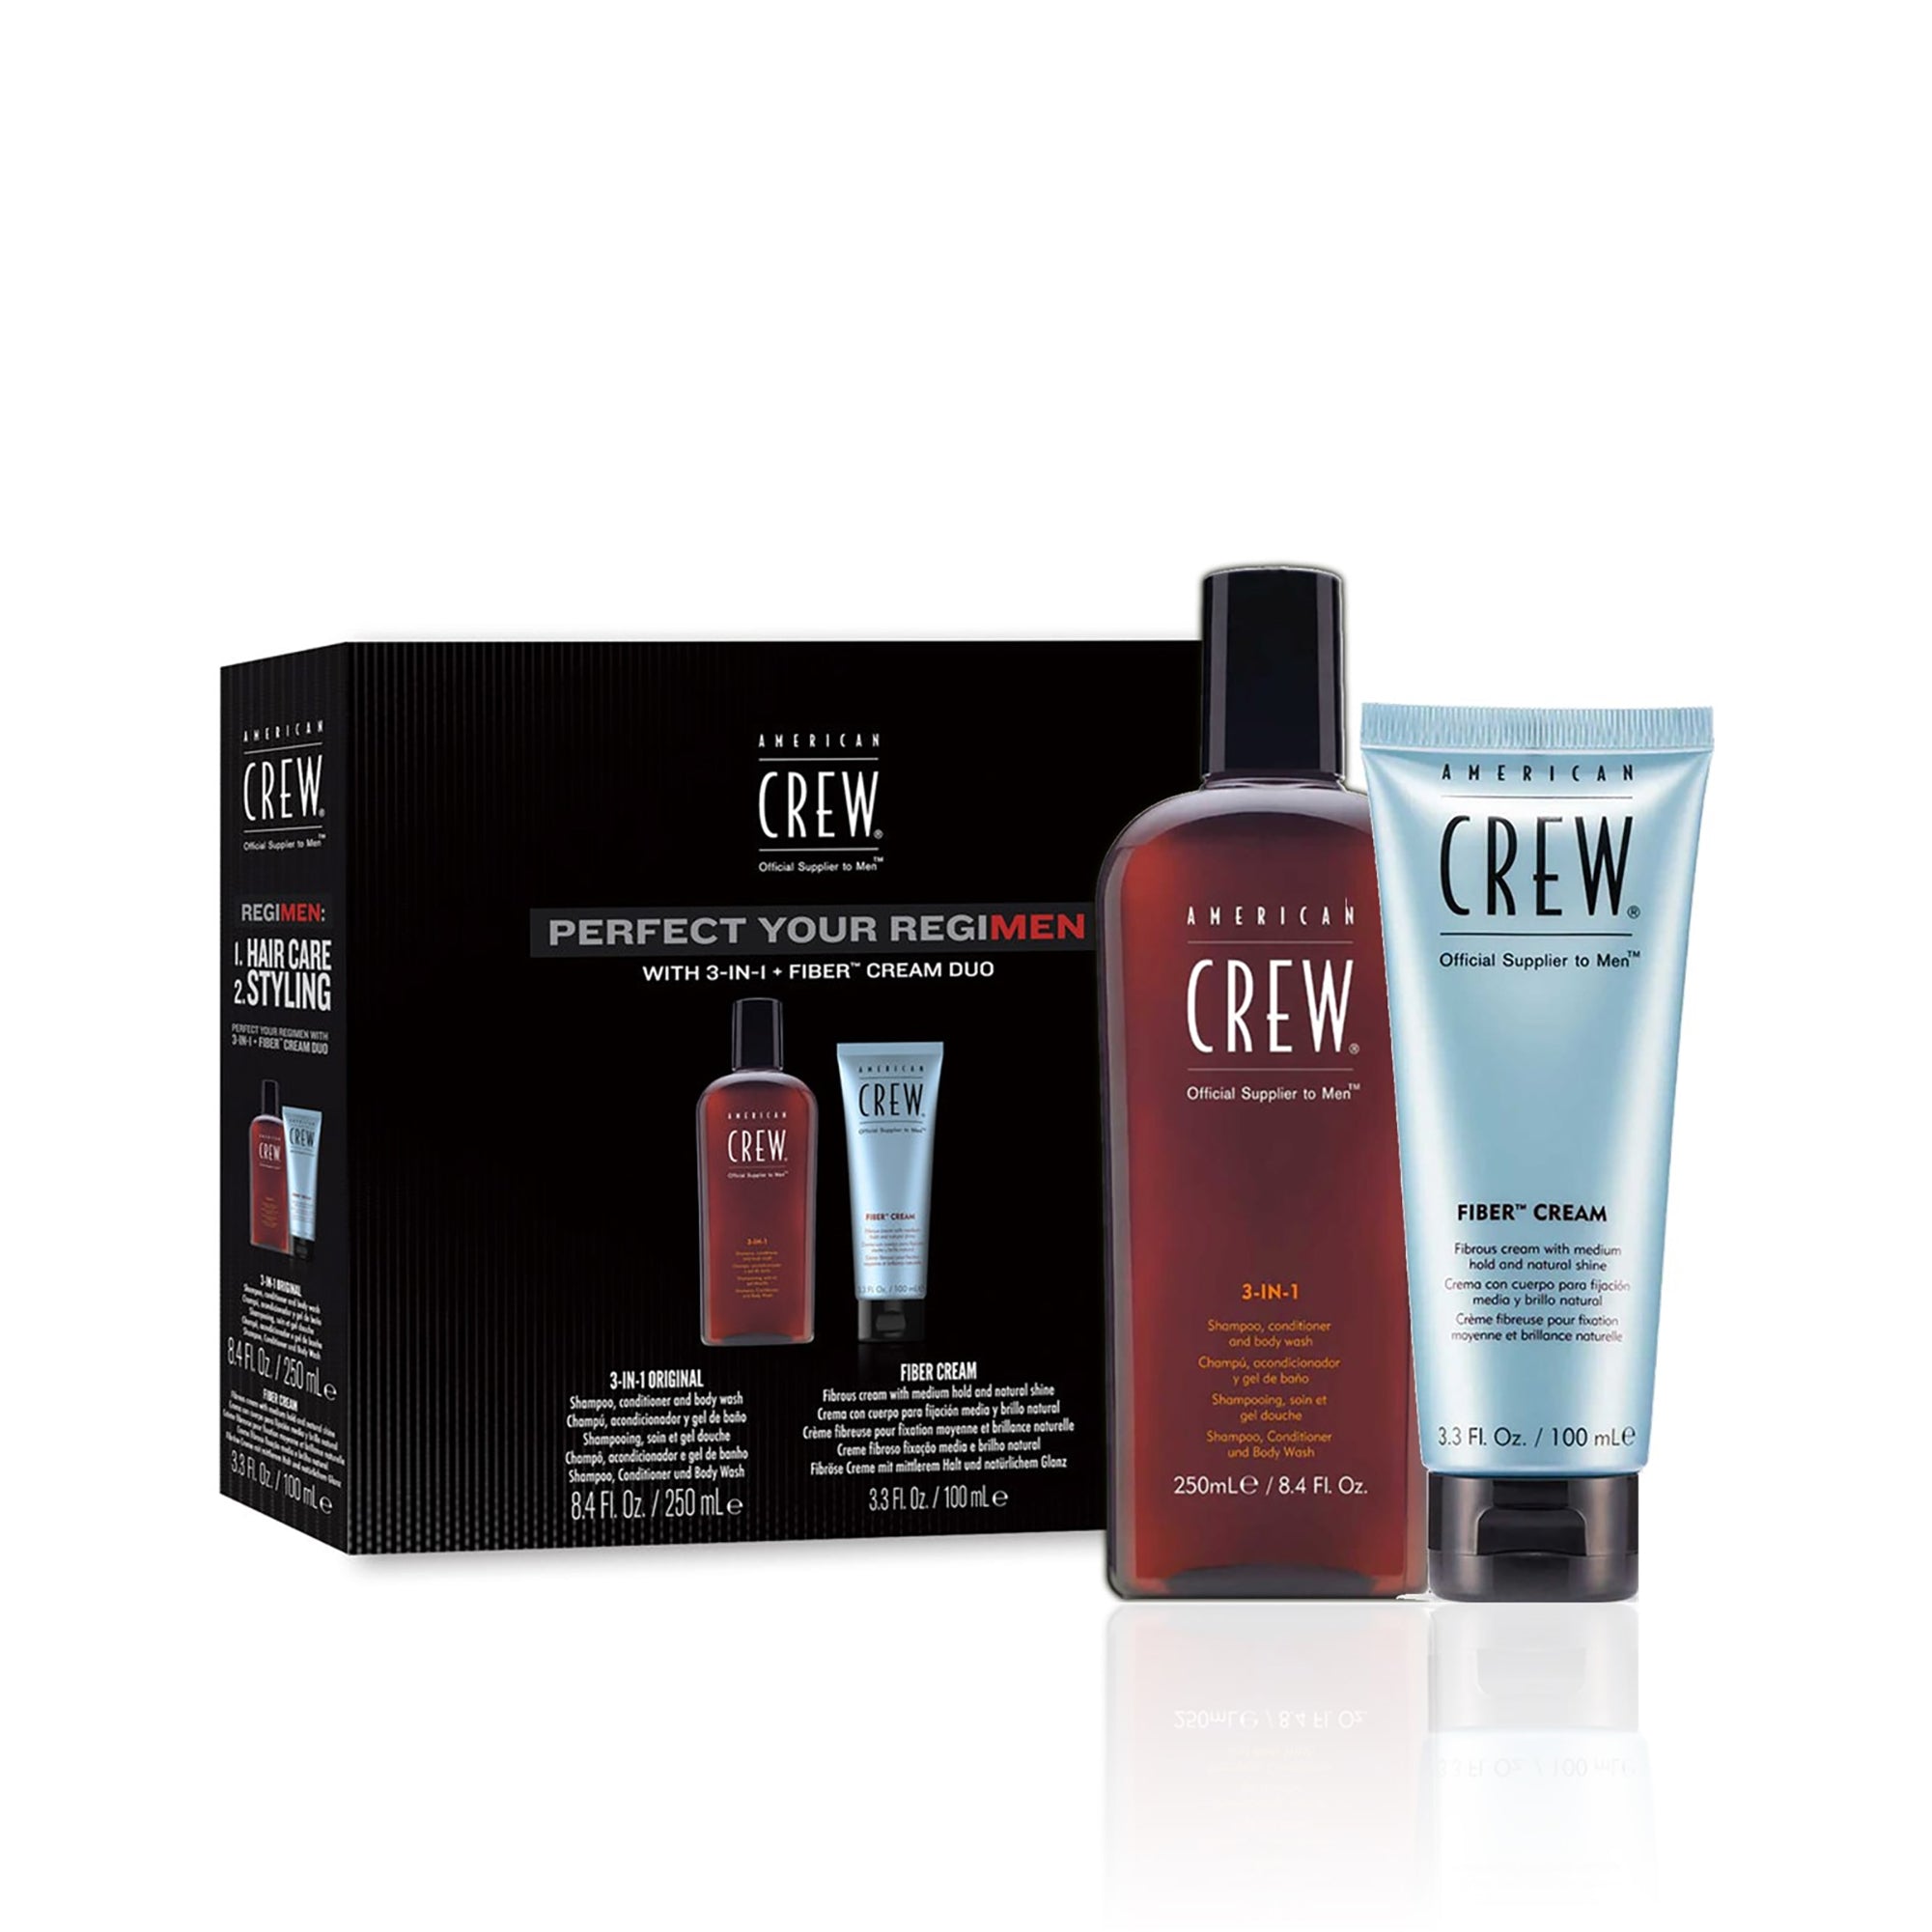 AMERICAN CREW GIFT PACK 